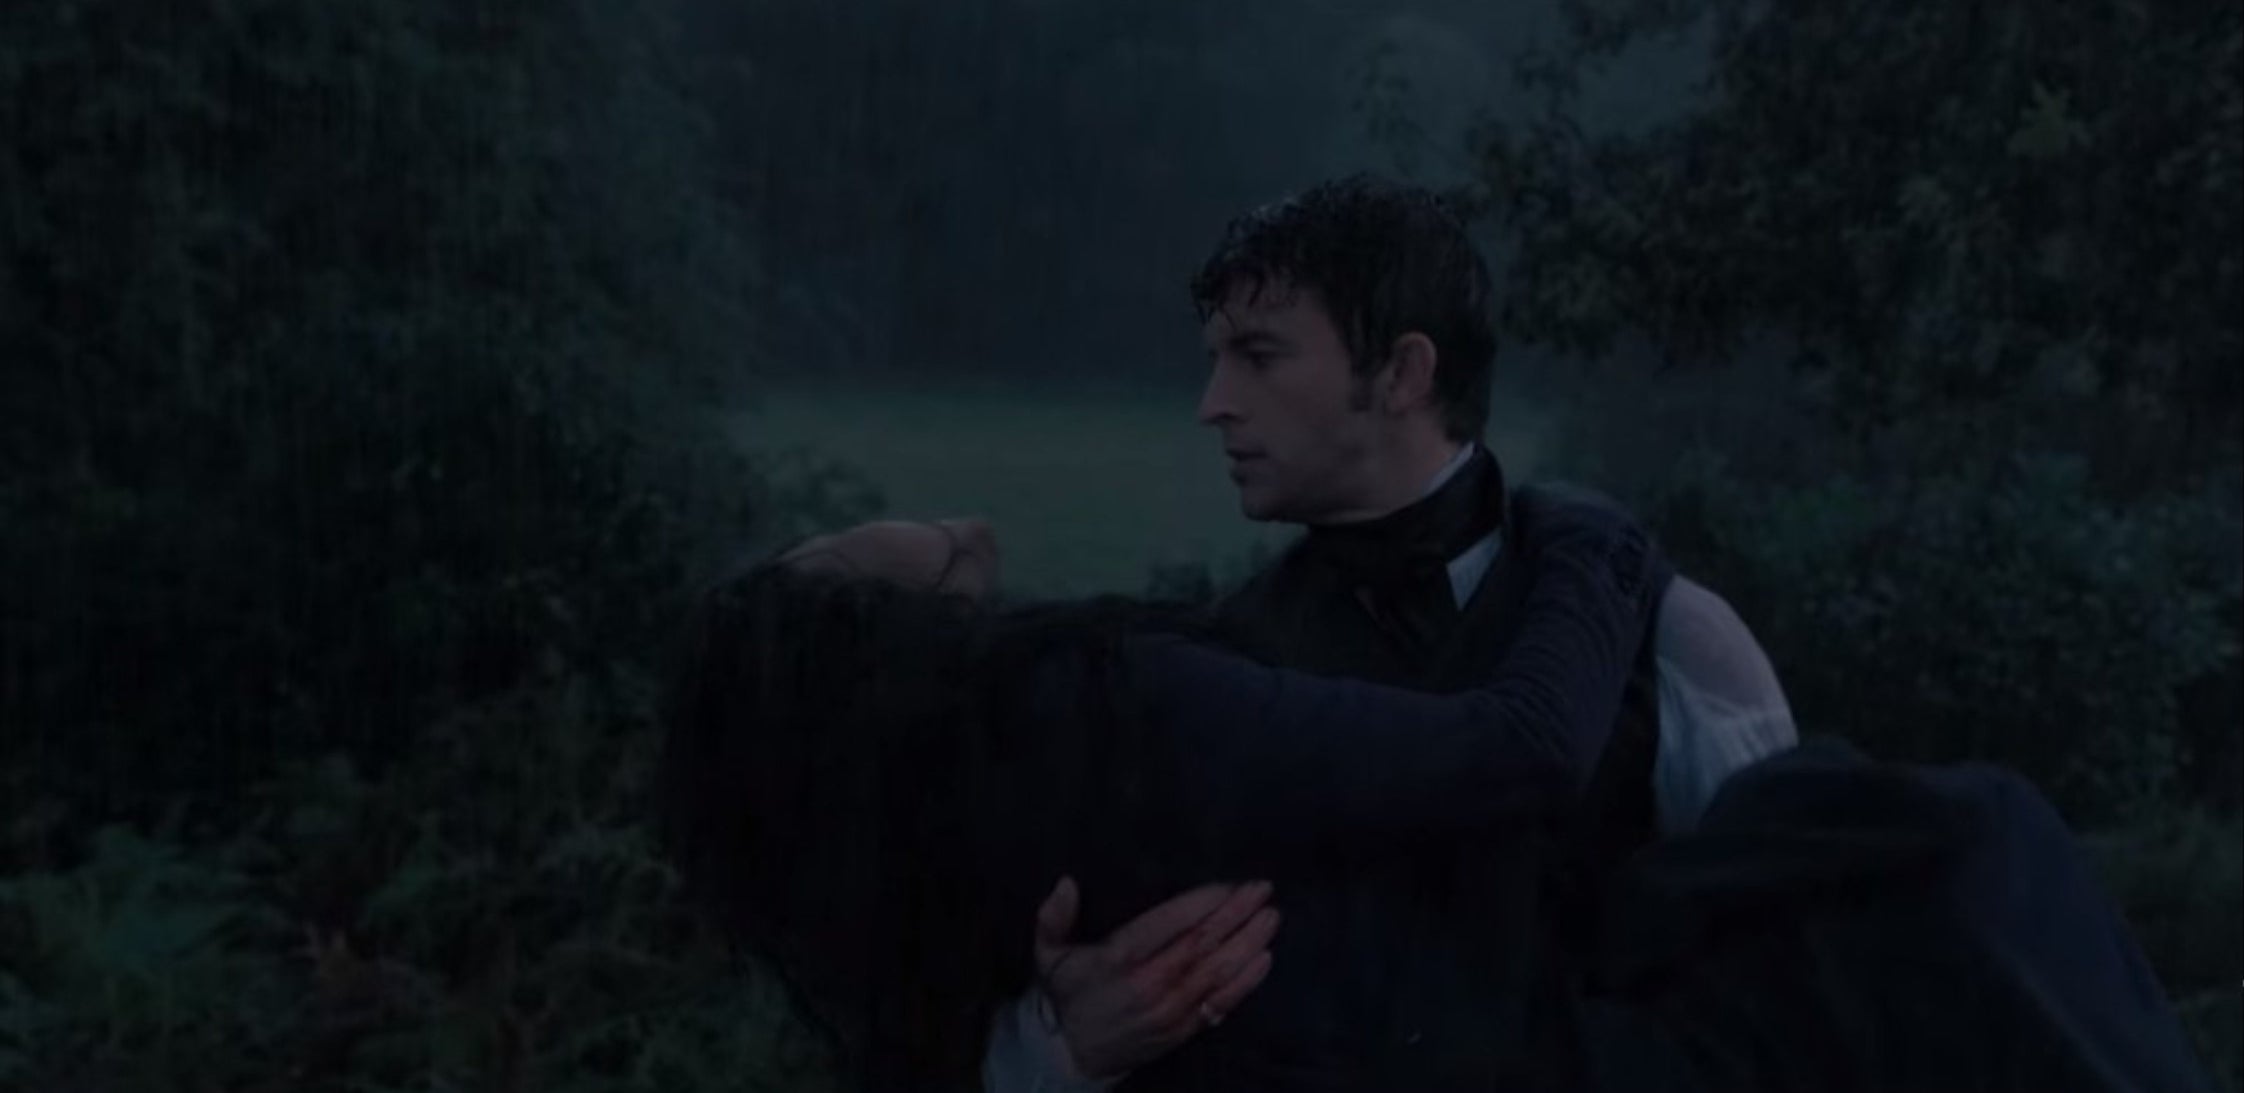 Anthony holding Kate after she got tossed off from the horse in the rain.